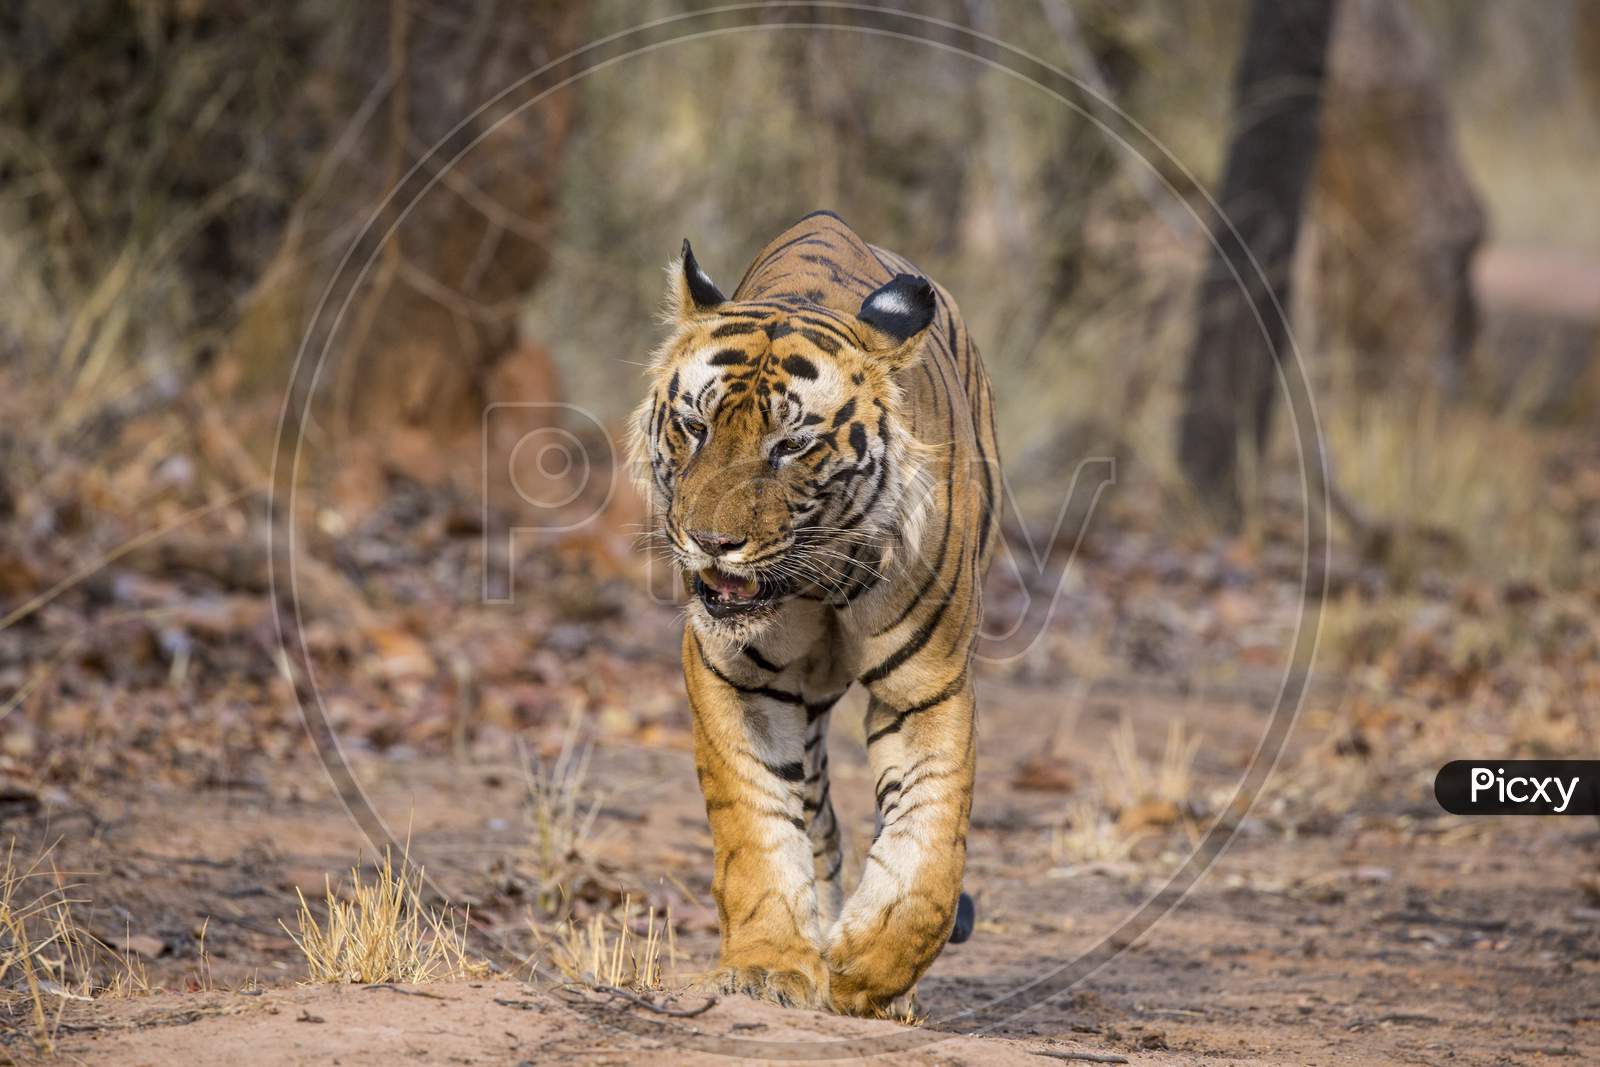 A Tiger walking in a Forest